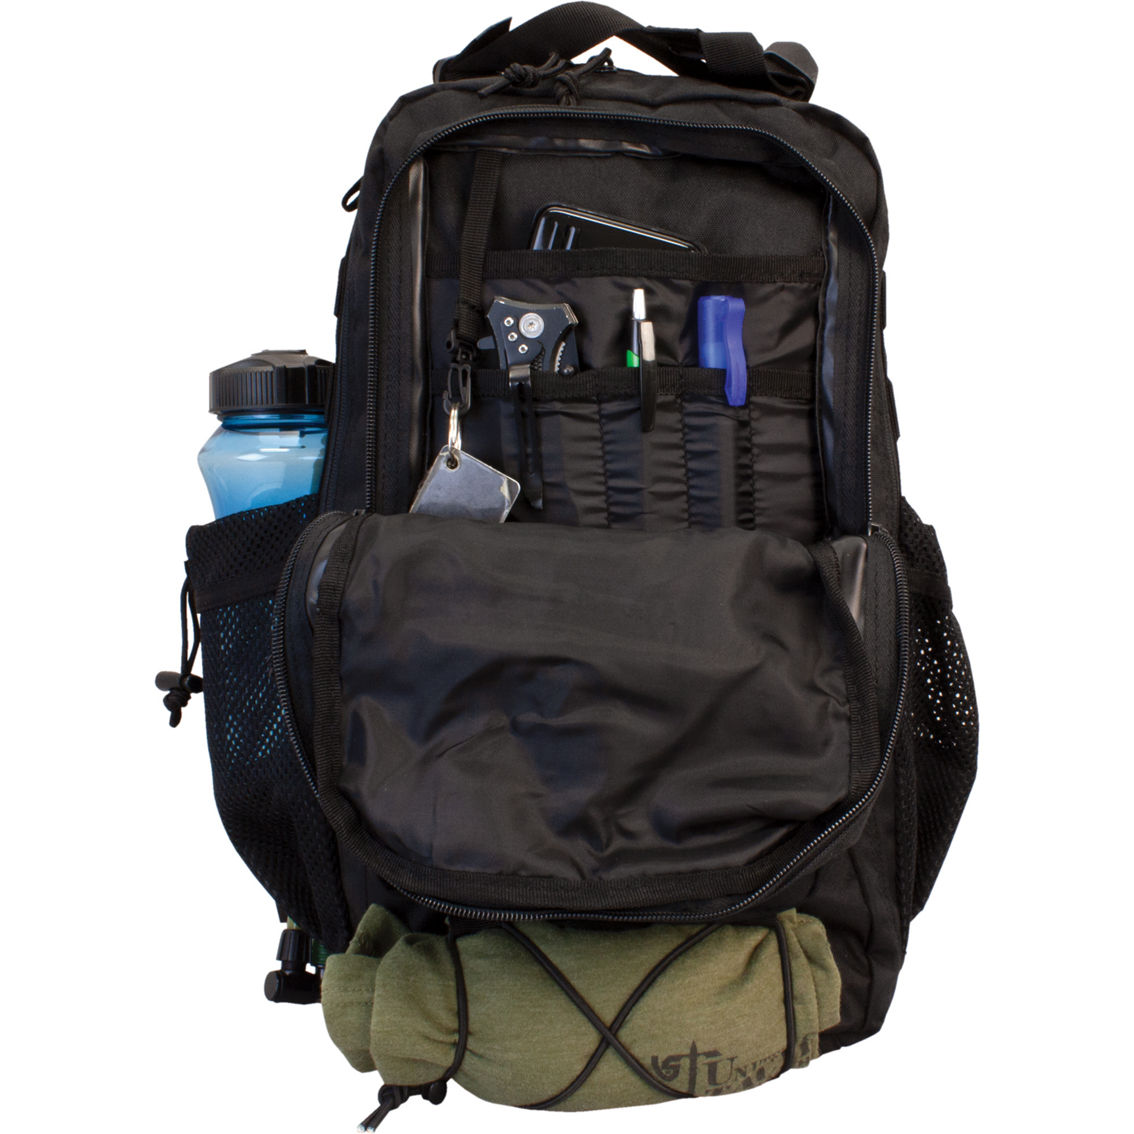 Red Rock Outdoor Gear Summit Backpack - Image 5 of 6